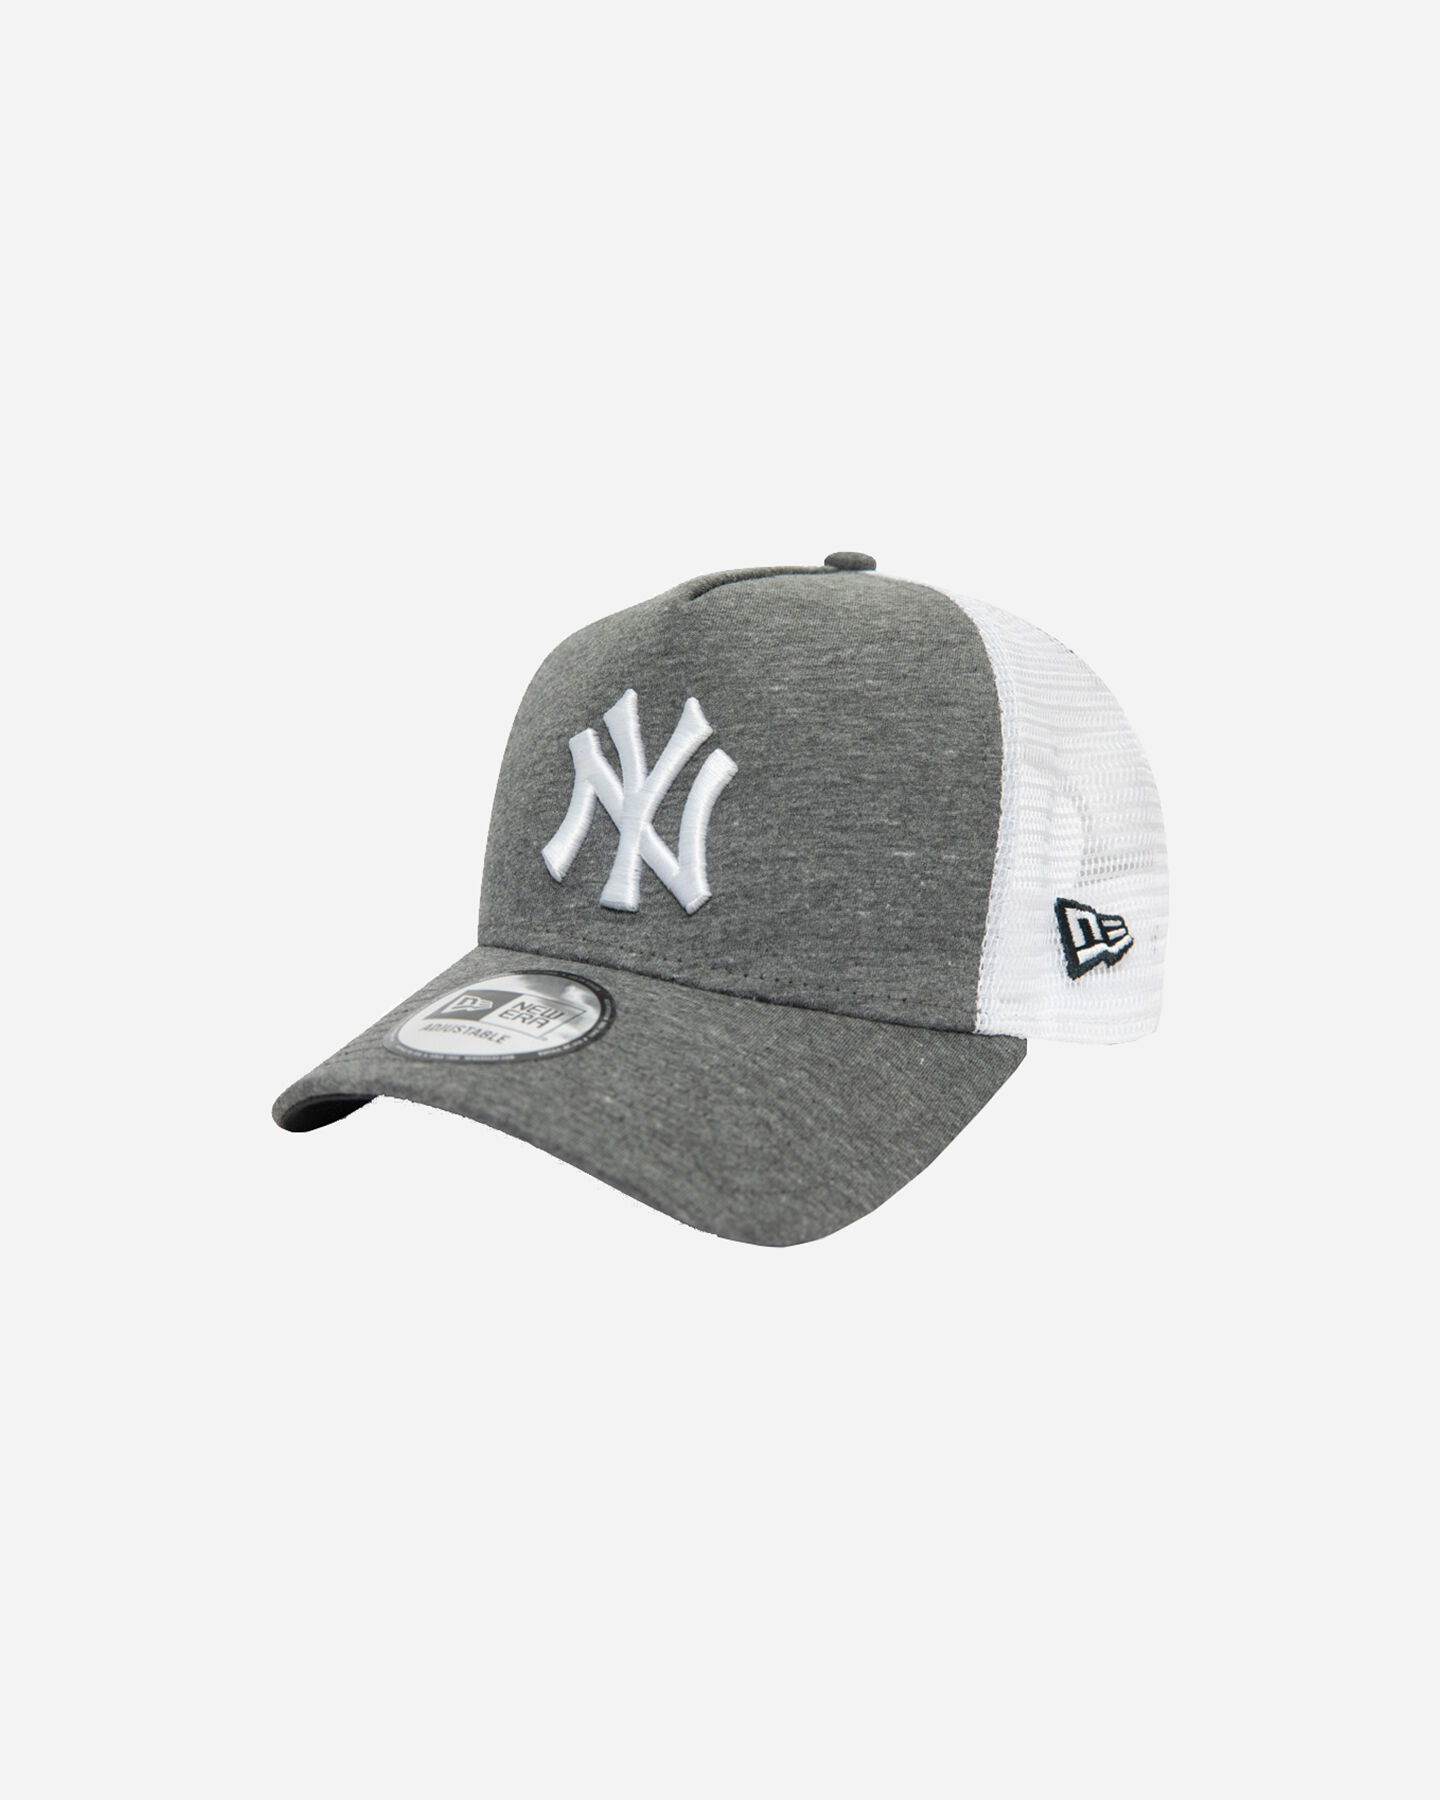  Cappellino NEW ERA 9FORTY AF TRUCKER NEW YORK YANKEES DK  S5245069|021|OSFM scatto 0